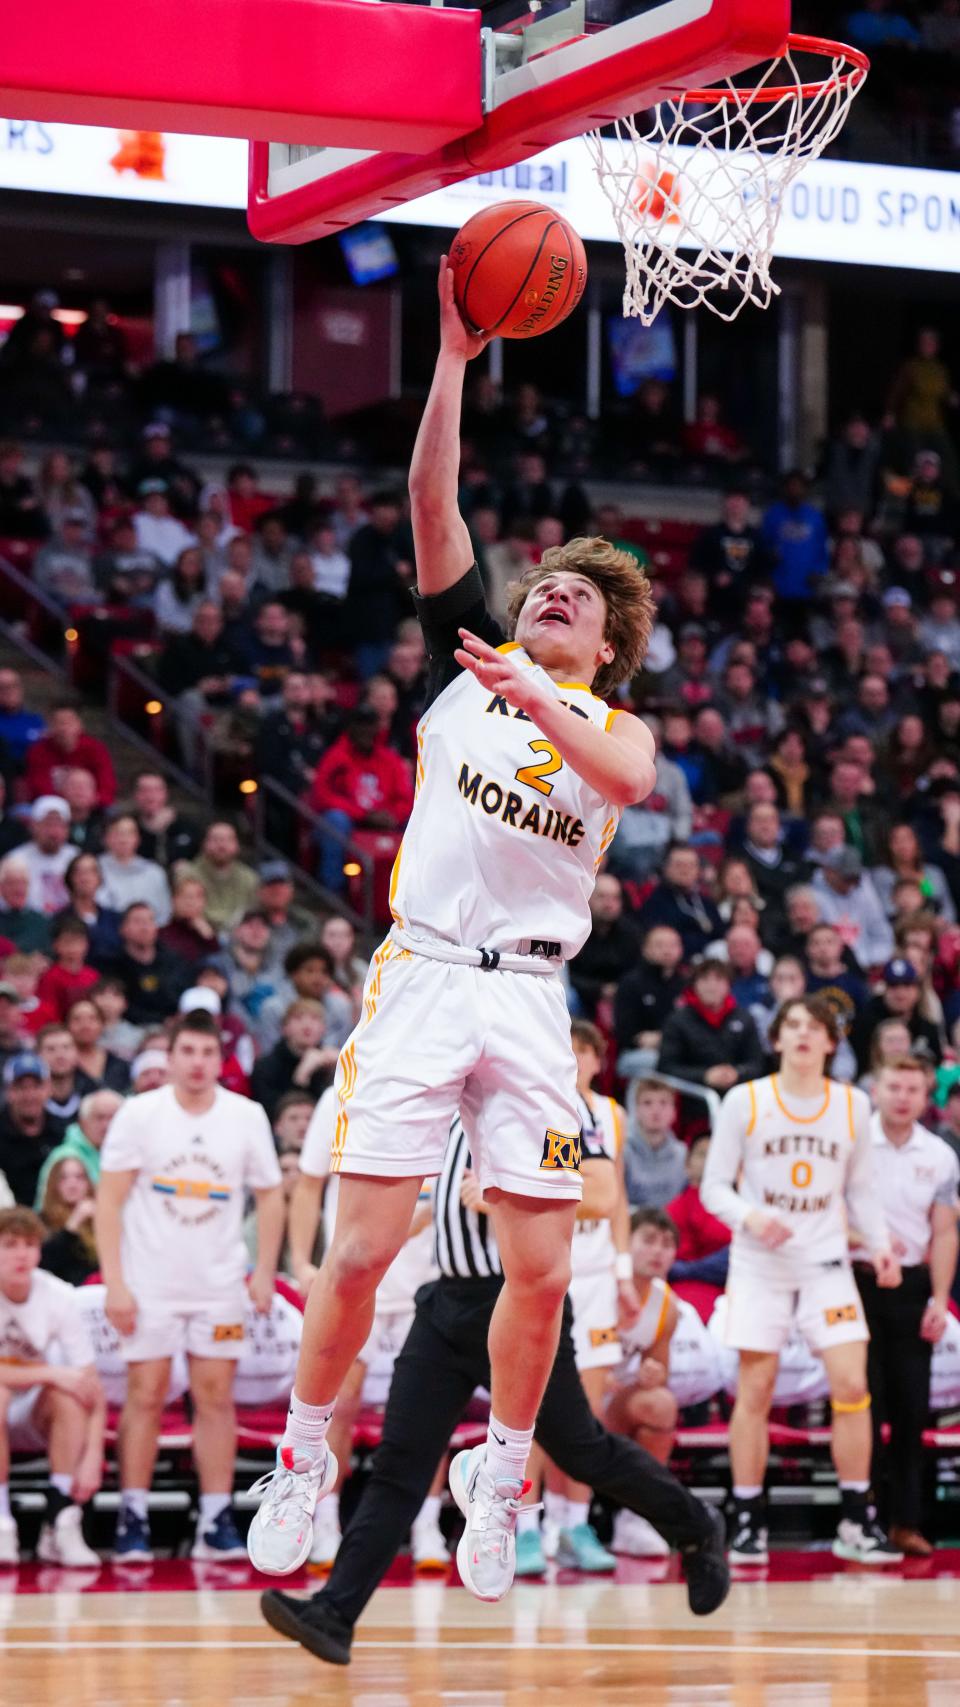 Drew Wagner was a key player in Kettle Moraine's run to the 2023 state tournament but made his first appearance of this season in the sectional final after recovering from surgery for a football injury.